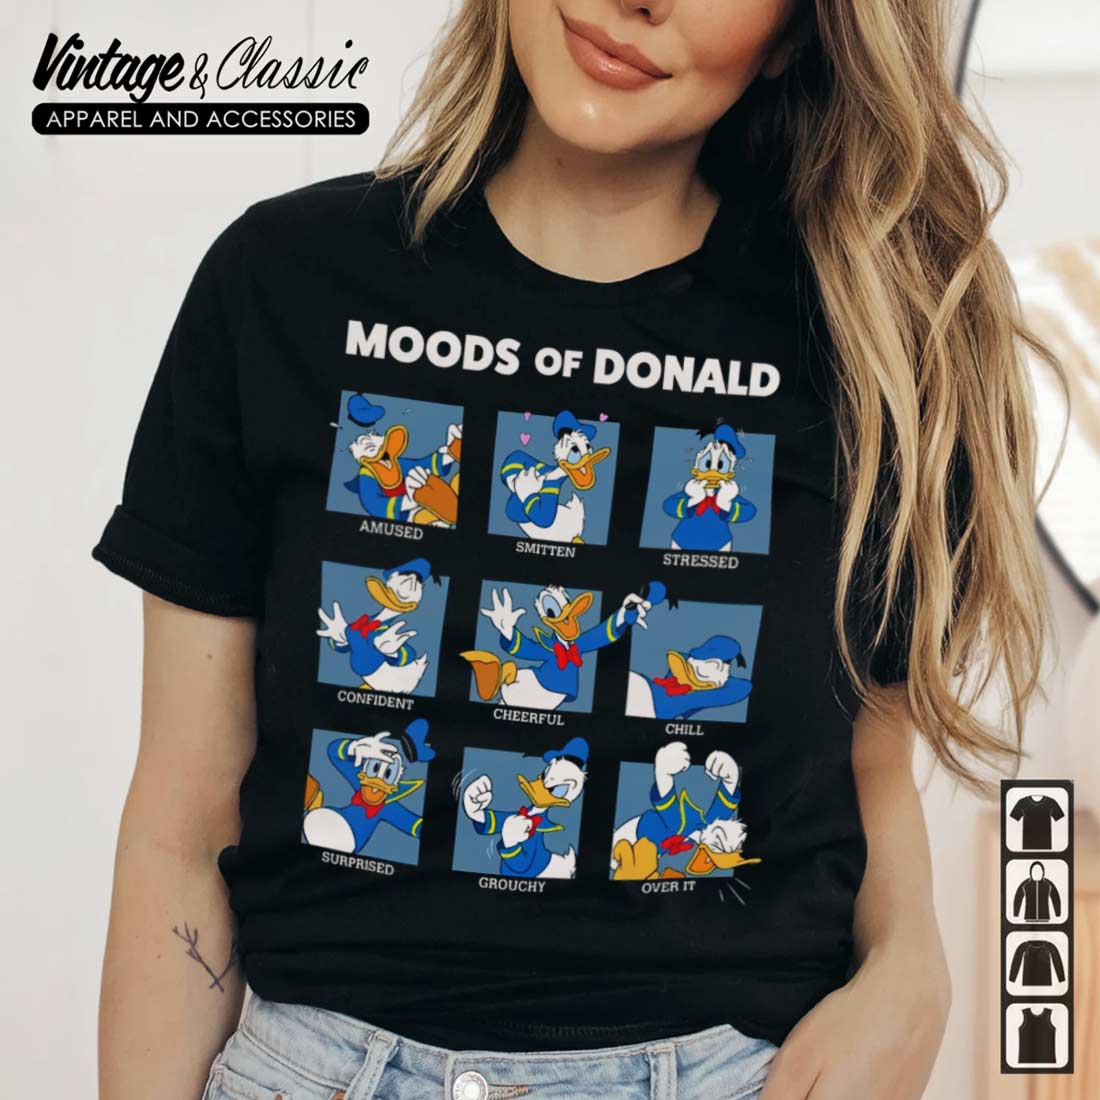 Donald Donald Shirt Face Moods Of Funny Tee Duck, Vintagenclassic -